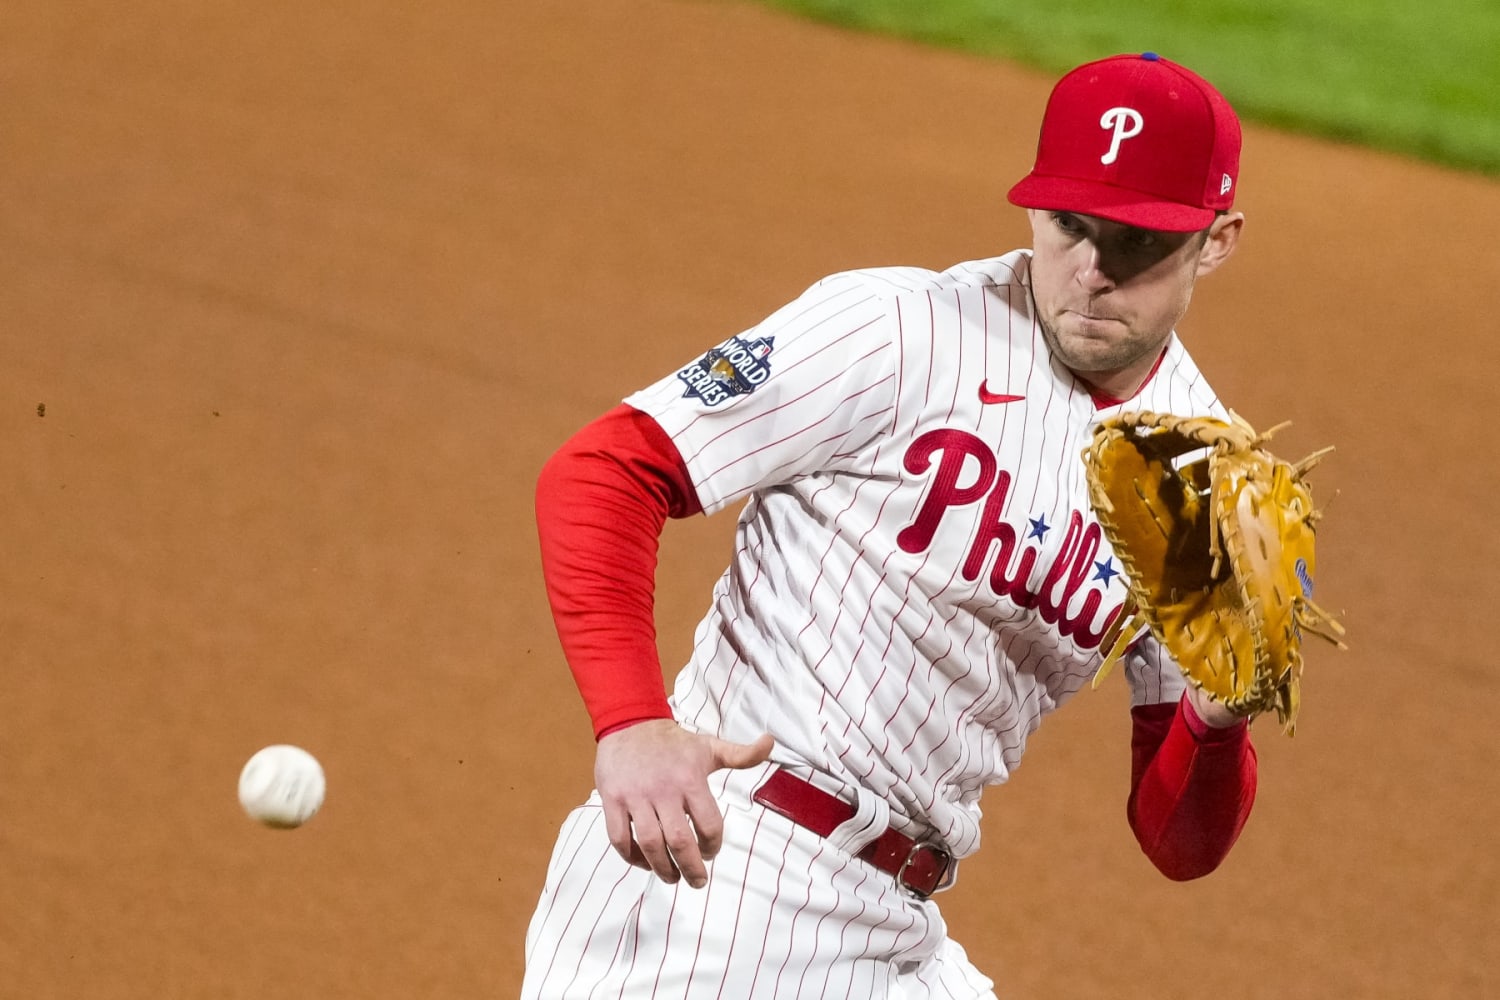 Phillies' Rhys Hoskins OK after being hit by pitch on hand, could